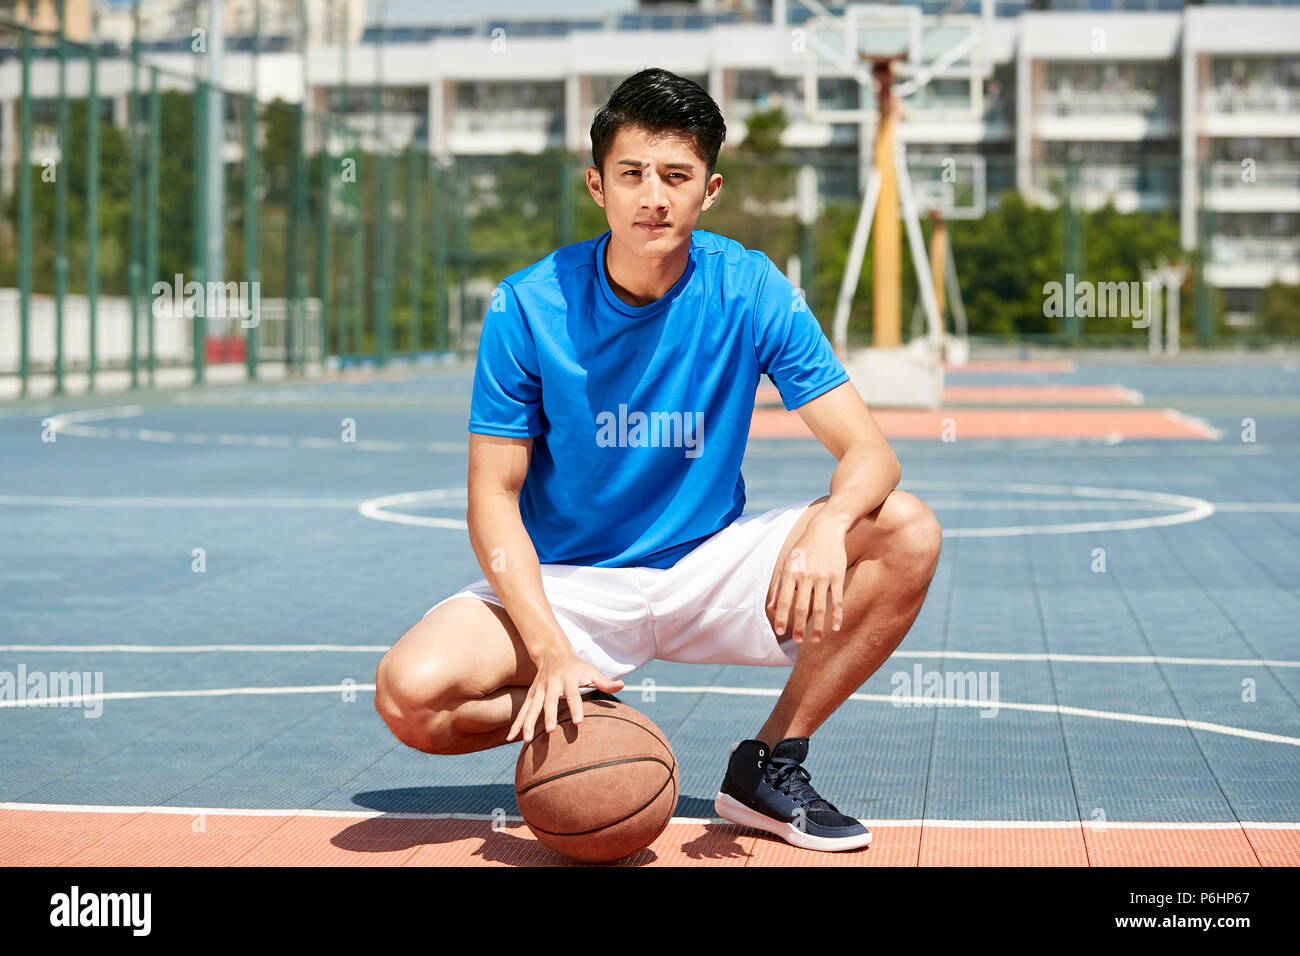 outdoor portrait of a young asian male basketball player Stock Photo